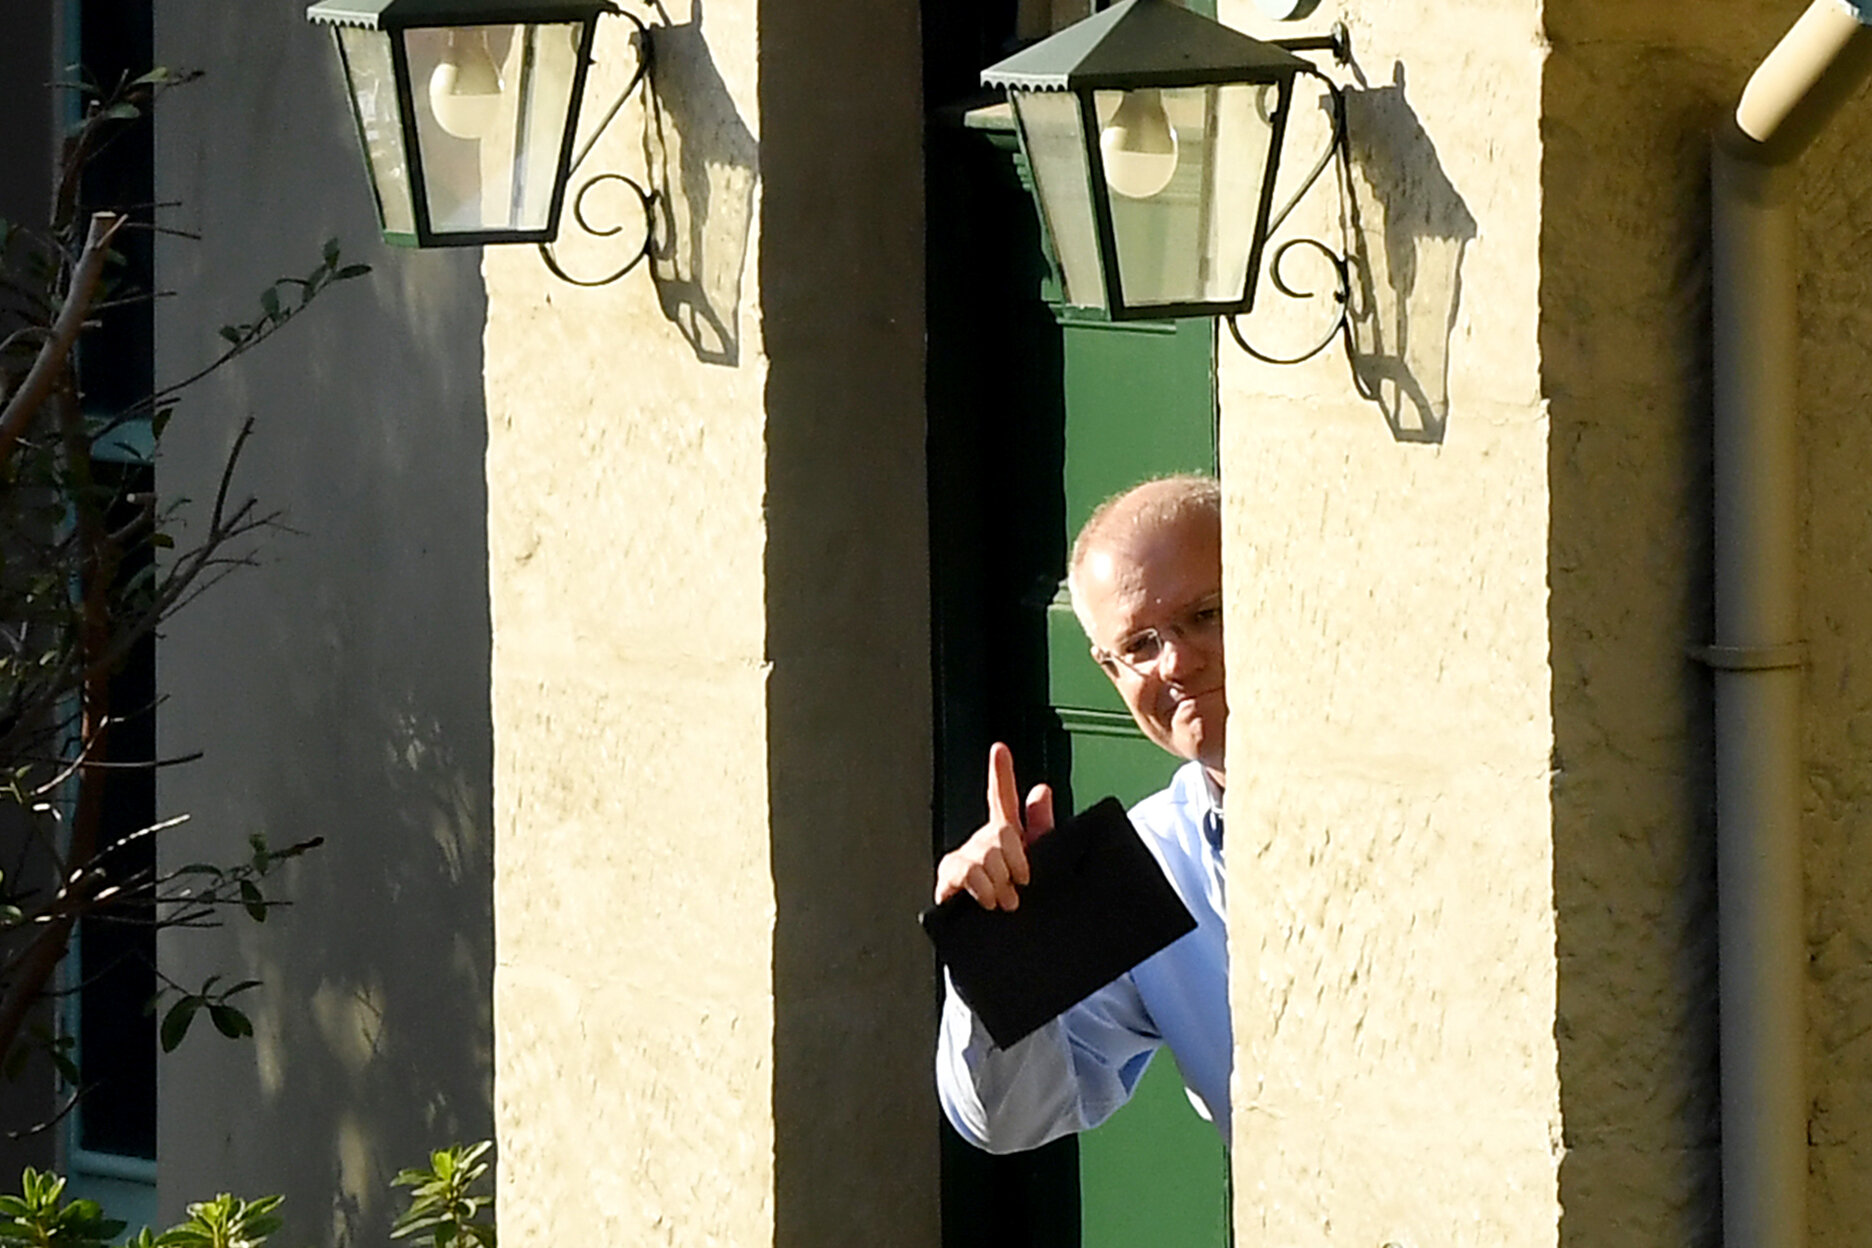  Newly re-elected Australian Prime Minister is seen looking out the door to expected media at Kirribilli House, Sydney, Sunday, 19 May, 2019. Scott Morrison lead the Coalition to an expected win in the 2019 Federal Election, becoming Australia's 30th